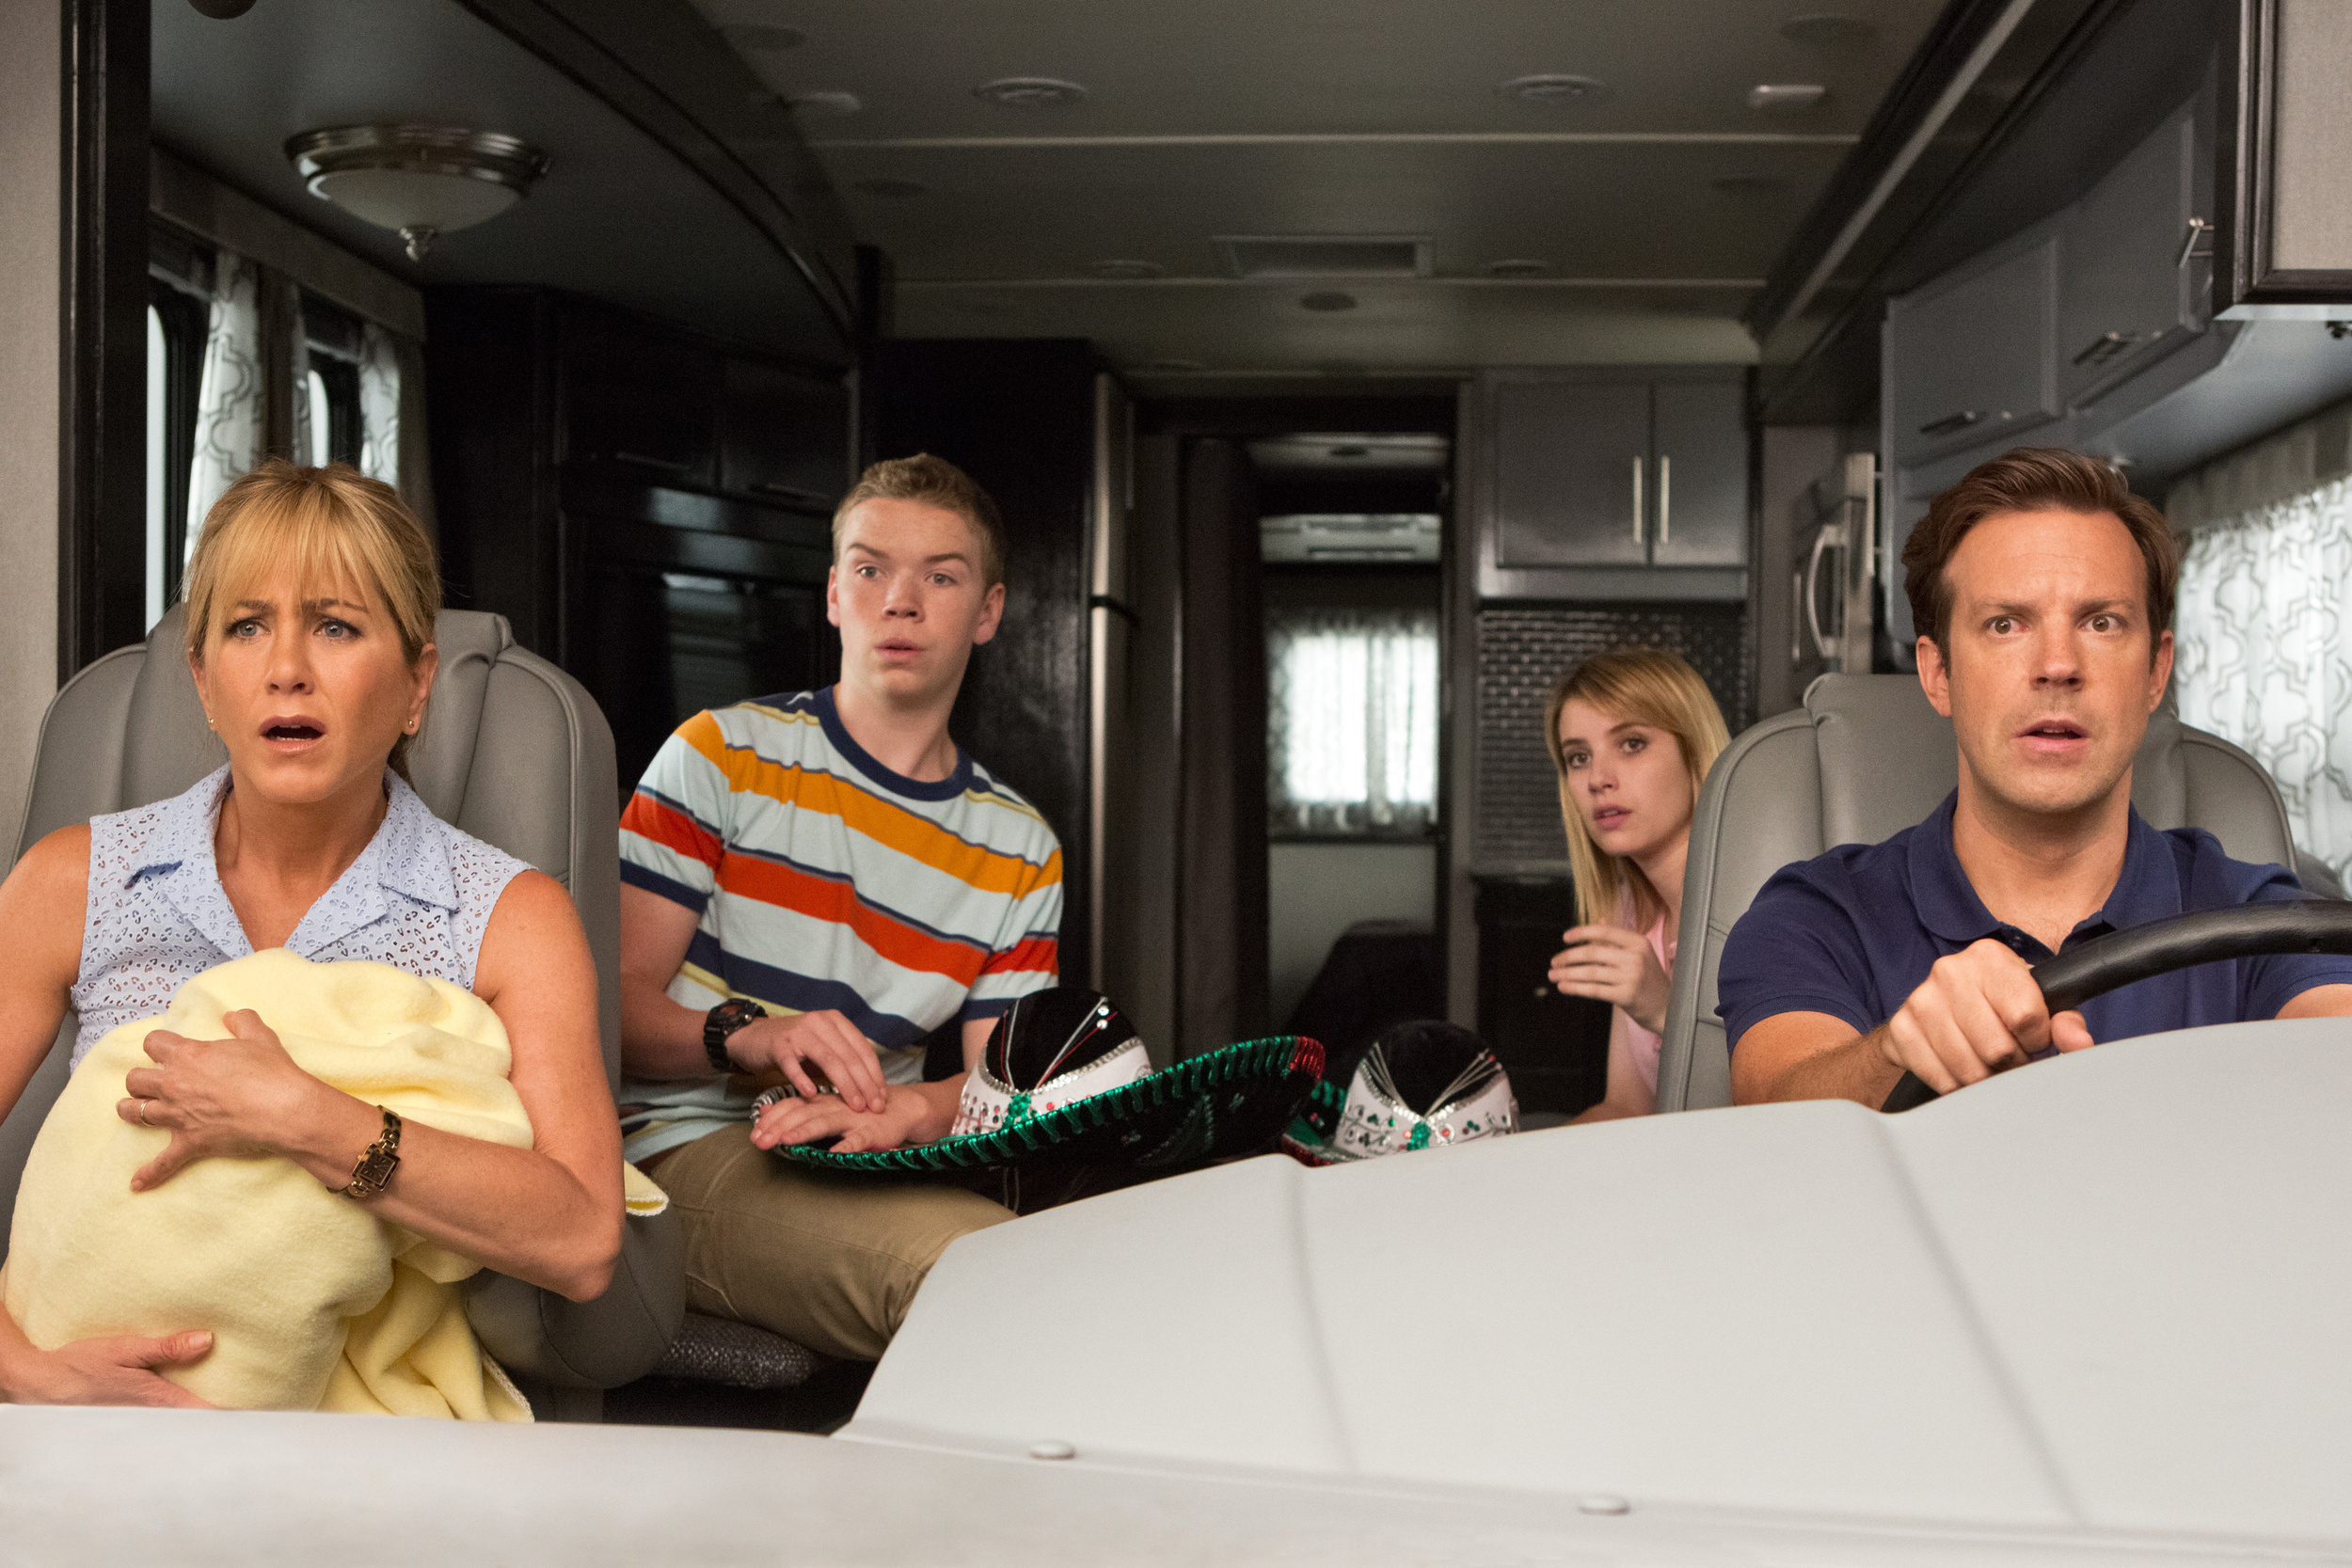 <p><em>We're the Millers</em> unsurprisingly did better with audiences than critics. Maybe not your first choice to see in the theater, but it makes for a great rental on a night in. However, I would probably still see it in a theater because critics were wrong on this one! Jason Sudeikis, Jennifer Aniston, and many other talented actors make for a well-rounded cast that makes this film so much fun to watch. 10/10.</p><p>You may also like: <a href='https://www.yardbarker.com/entertainment/articles/the_biggest_one_hit_wonders_from_the_80s_021423/s1__35133602'>The biggest one-hit wonders from the '80s</a></p>